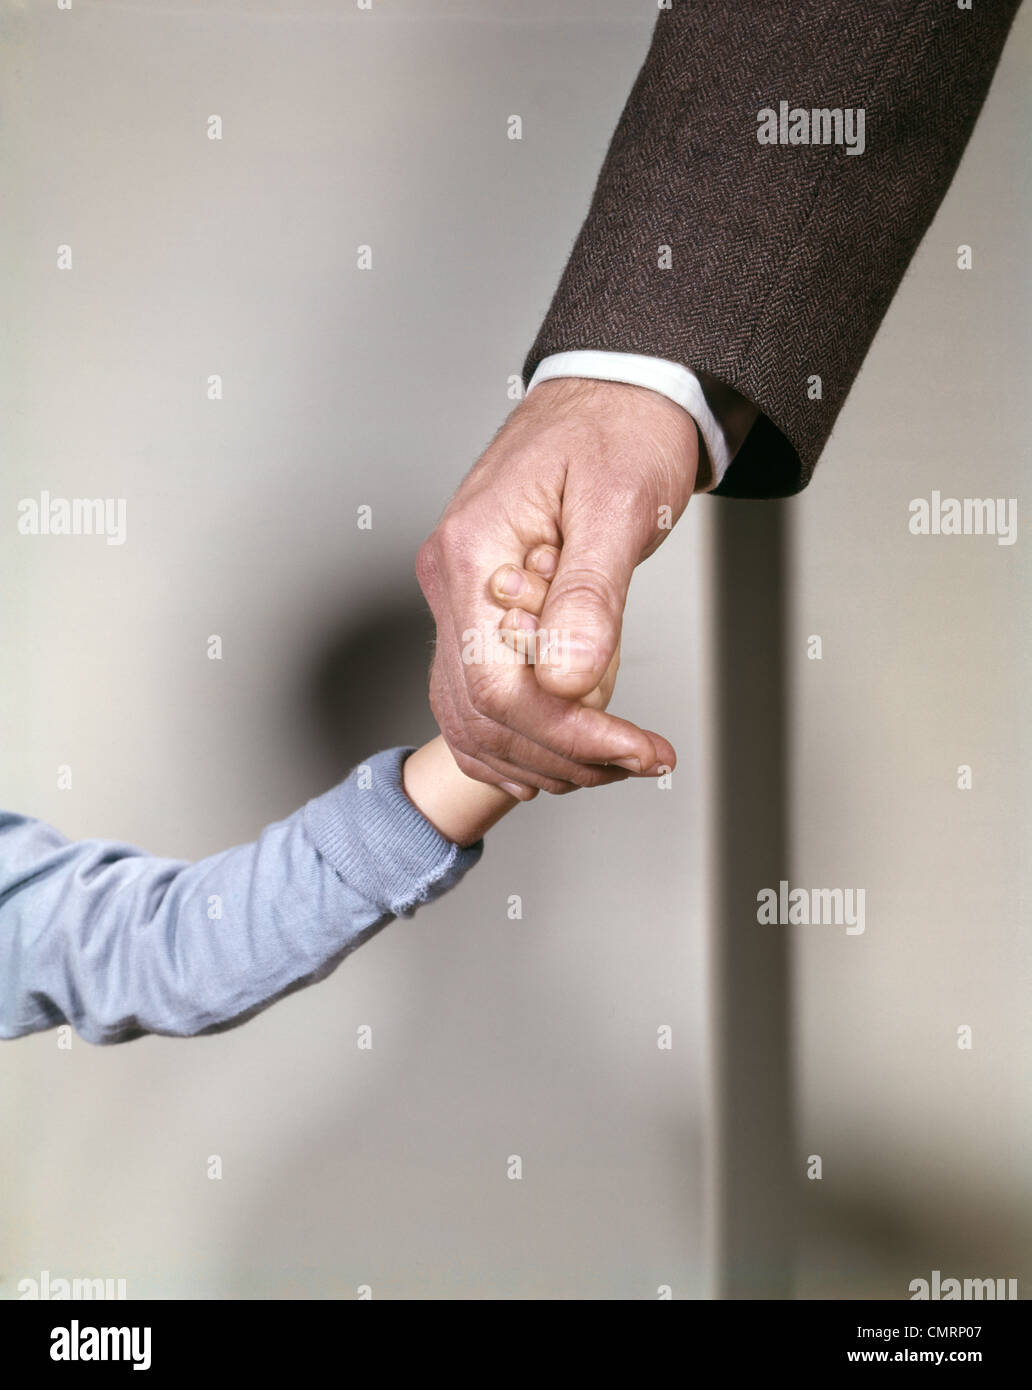 1960s ADULT MAN HAND HOLDING THAT OF SMALL CHILD TODDLER FATHER YOUNG OLD SAFETY PROTECTION GUIDANCE RETRO Stock Photo